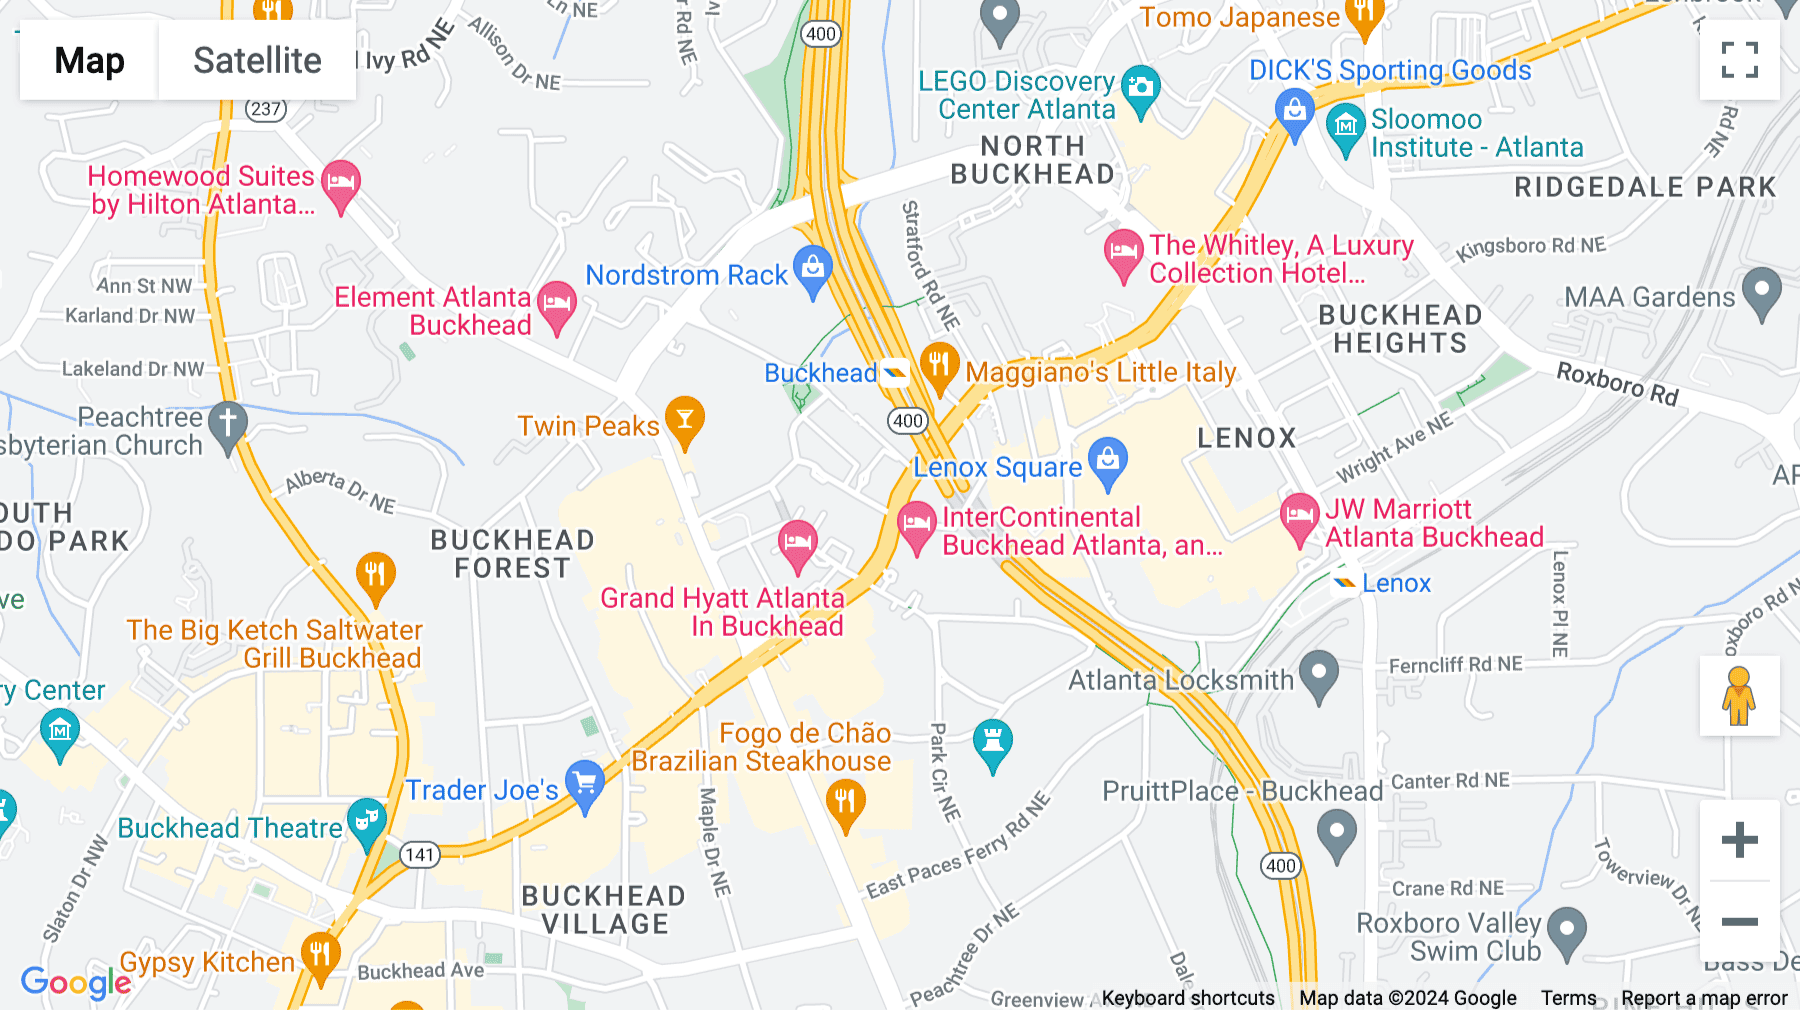 Click for interative map of 3340 Peachtree Road NE, Suite 1800, Buckhead Tower Place Center, Atlanta